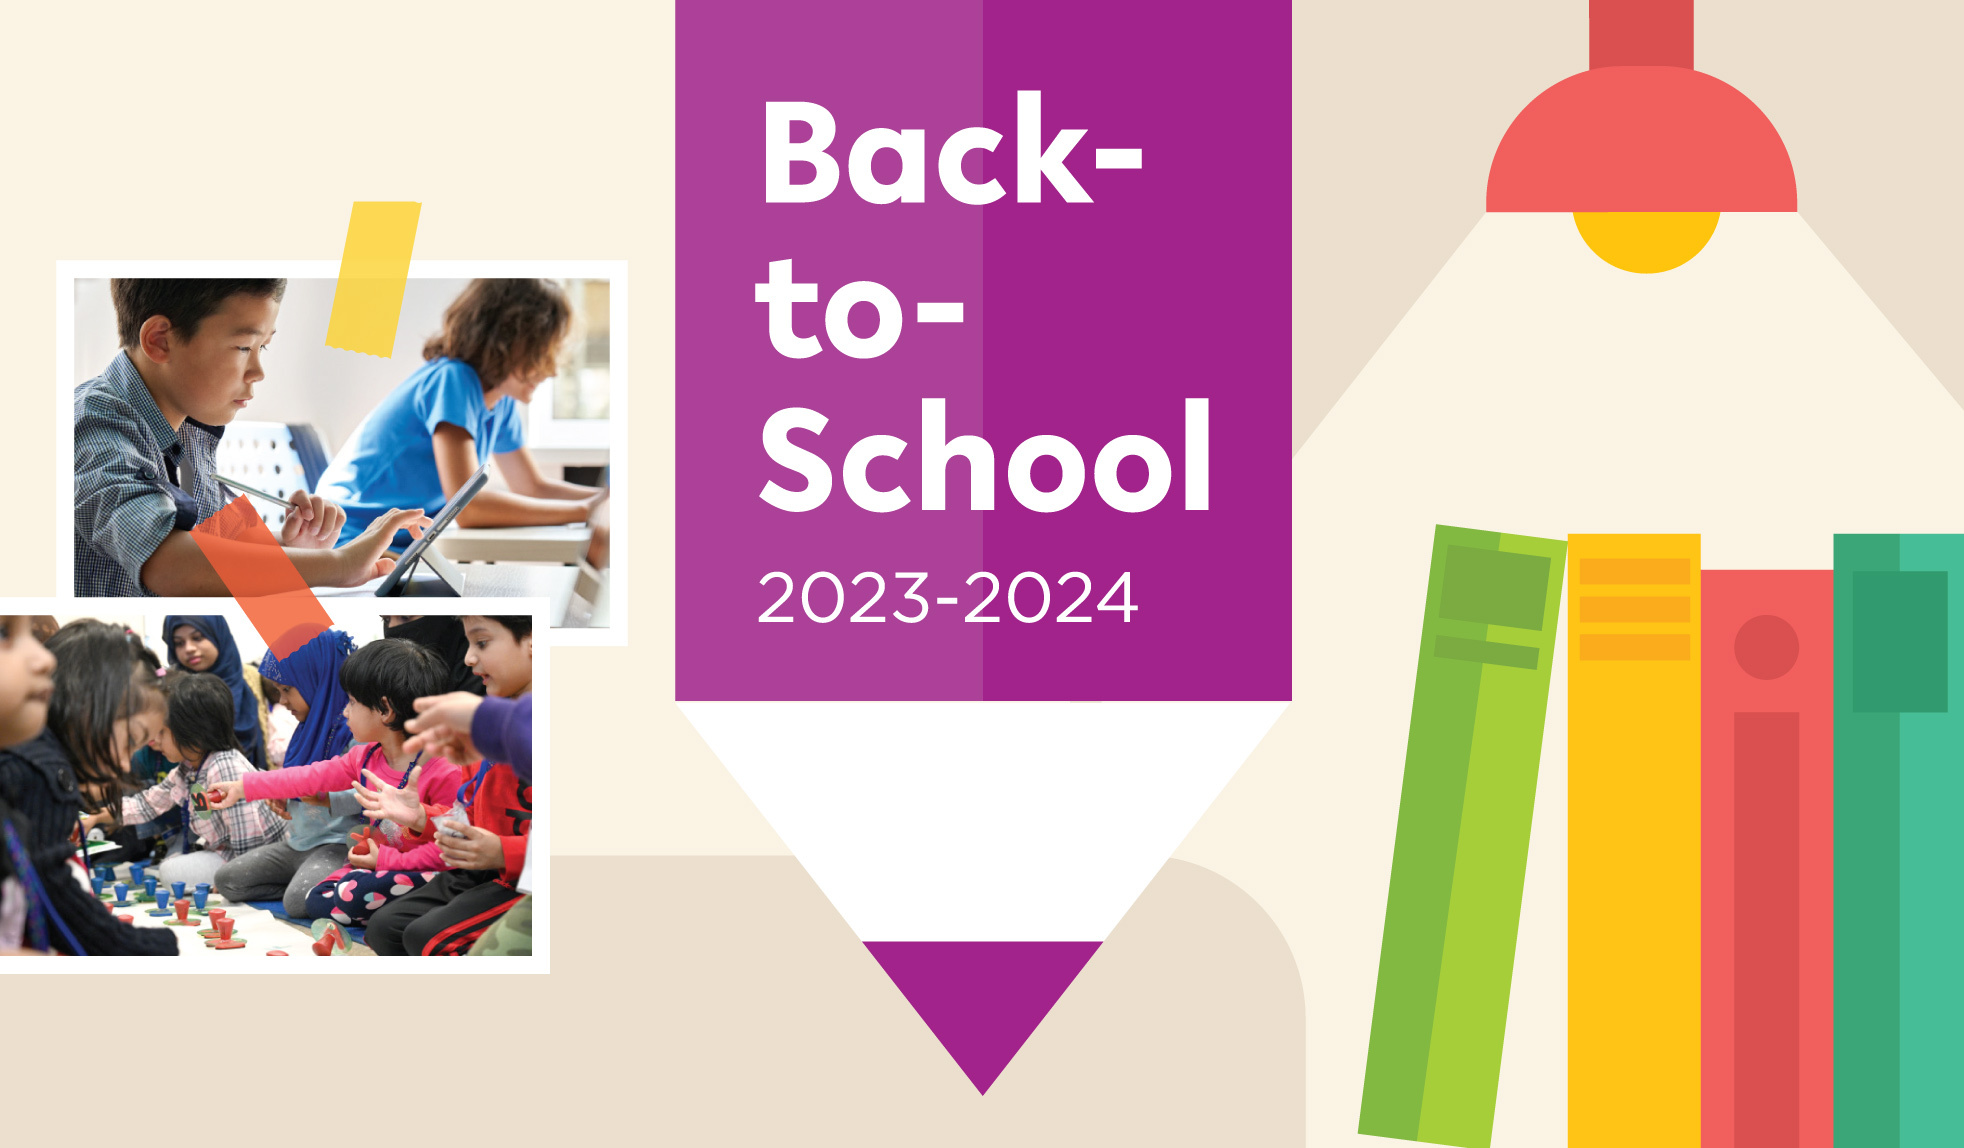 Read our Back-to-School Guide in four languages, join us for programs, and more.